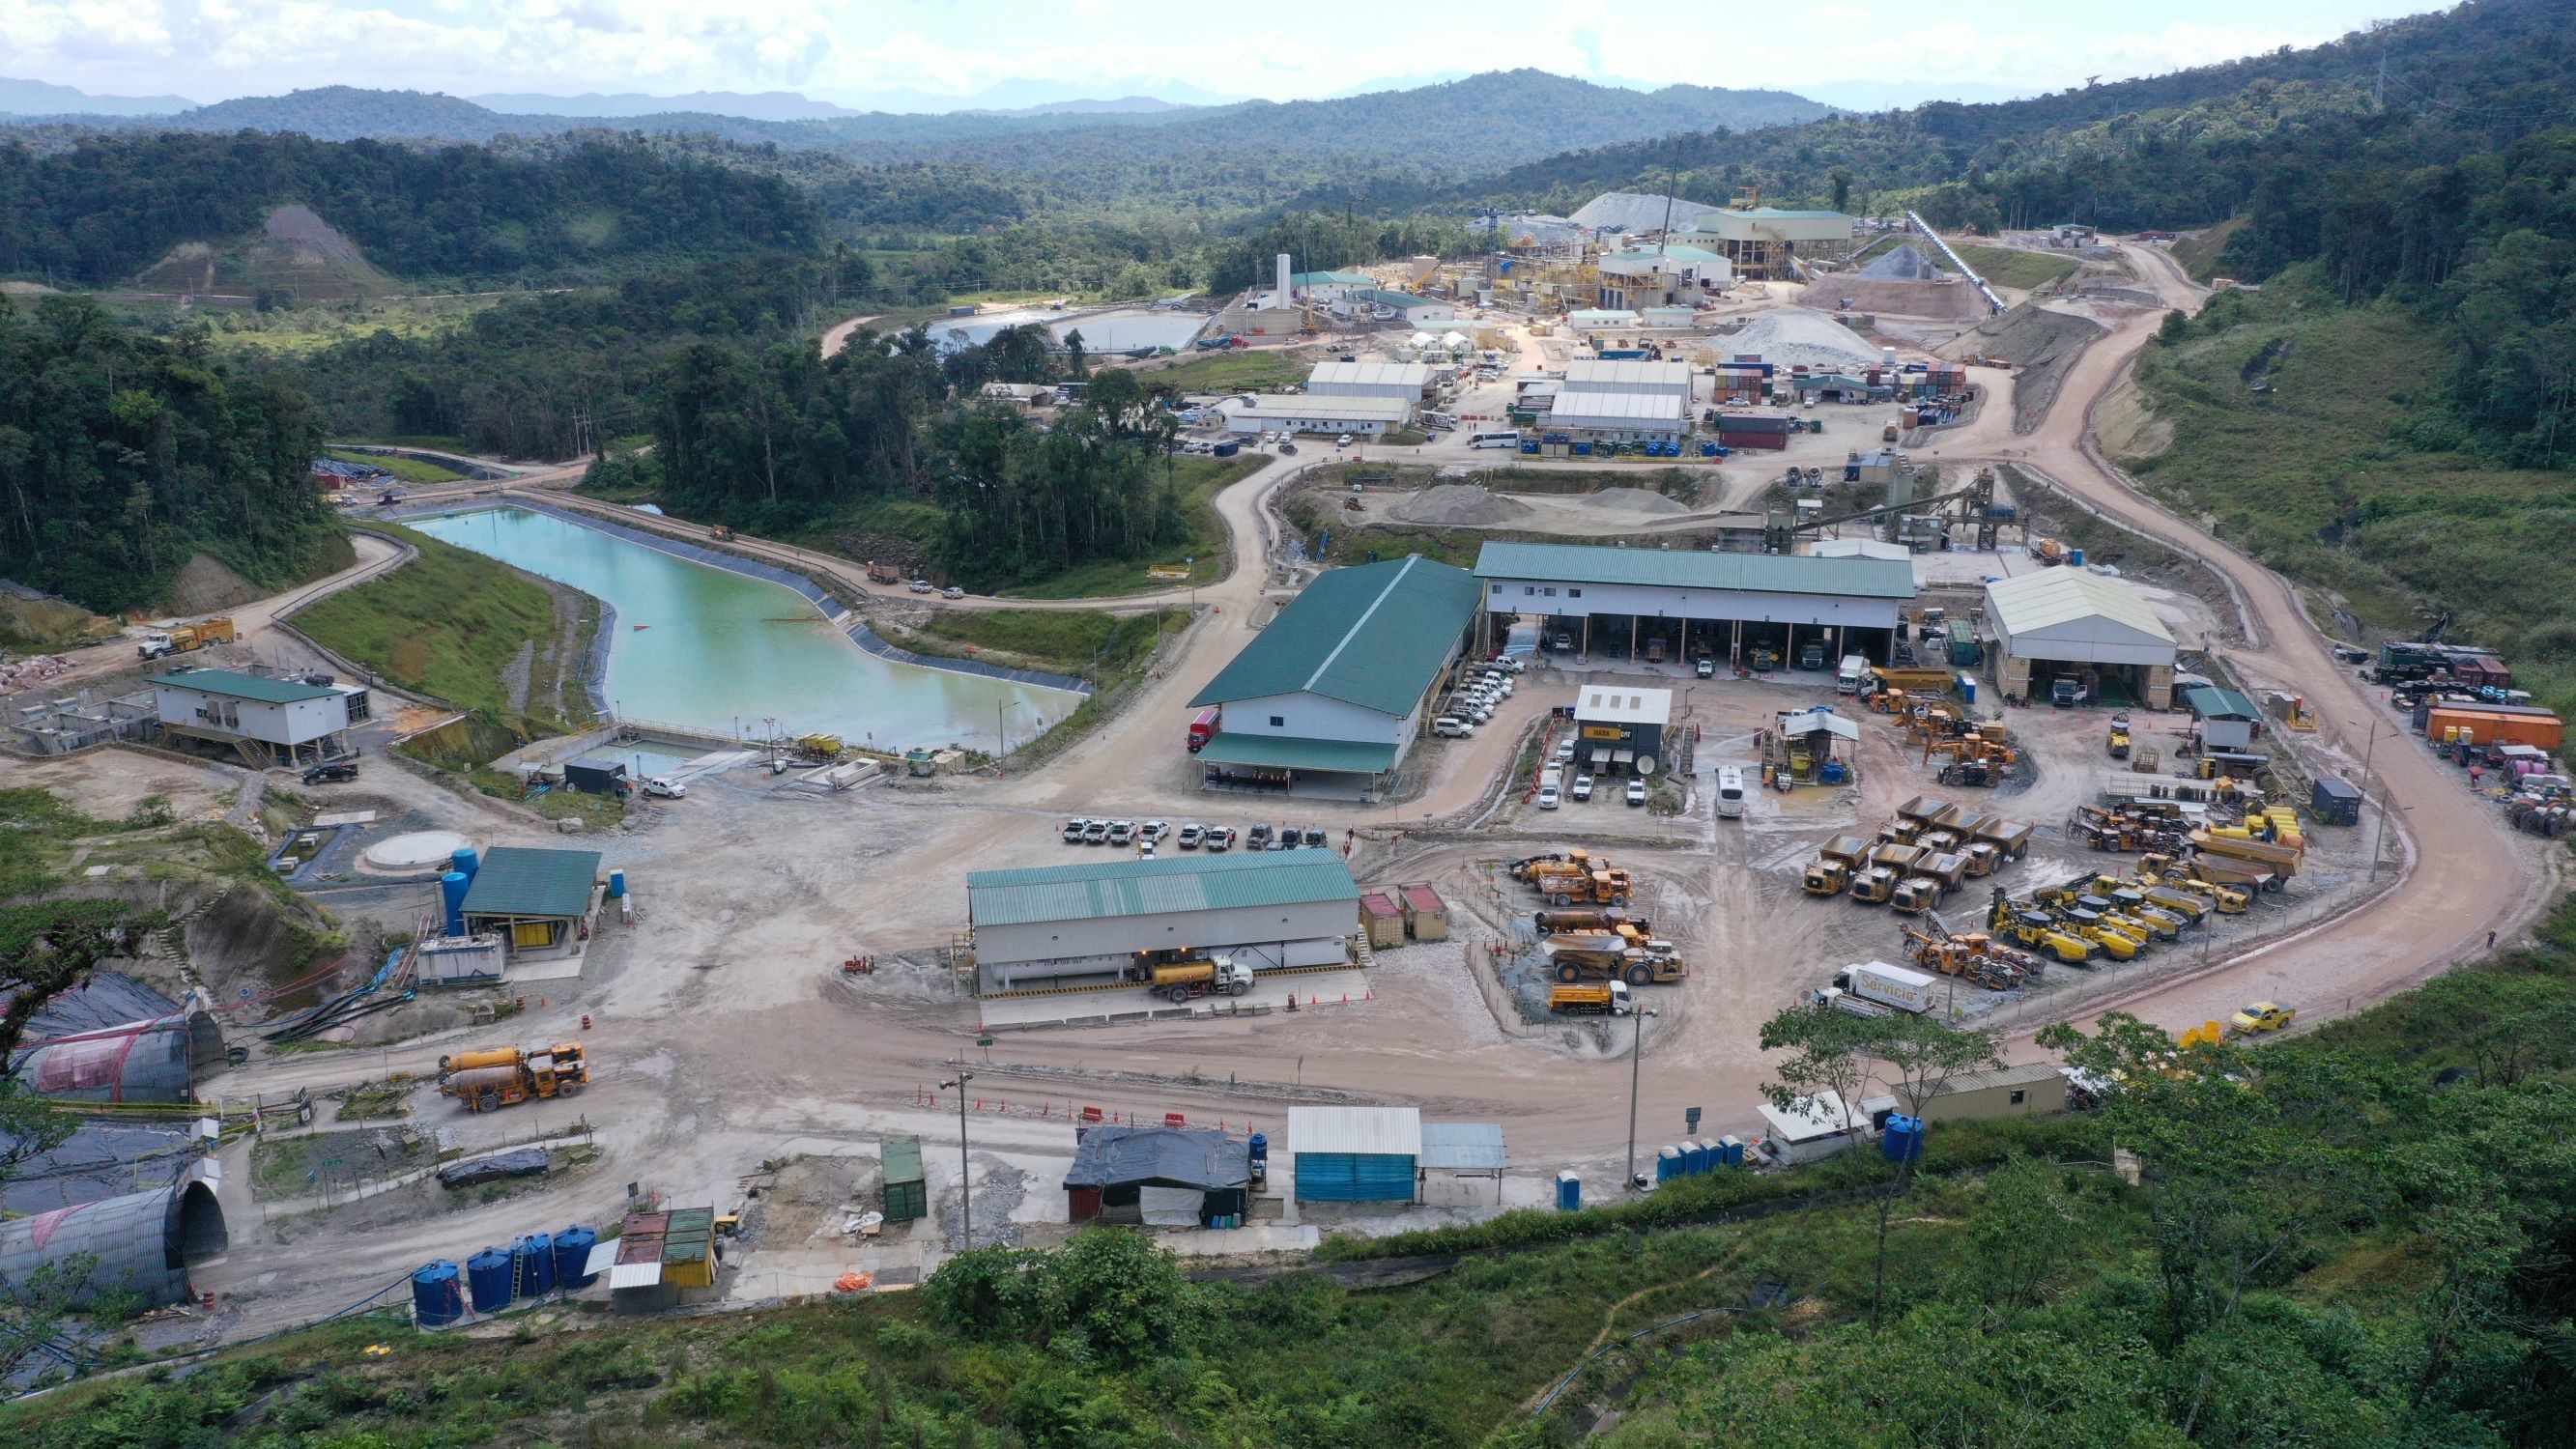 Mining News - Lundin Gold provides 2020 outlook for Ecuador mine